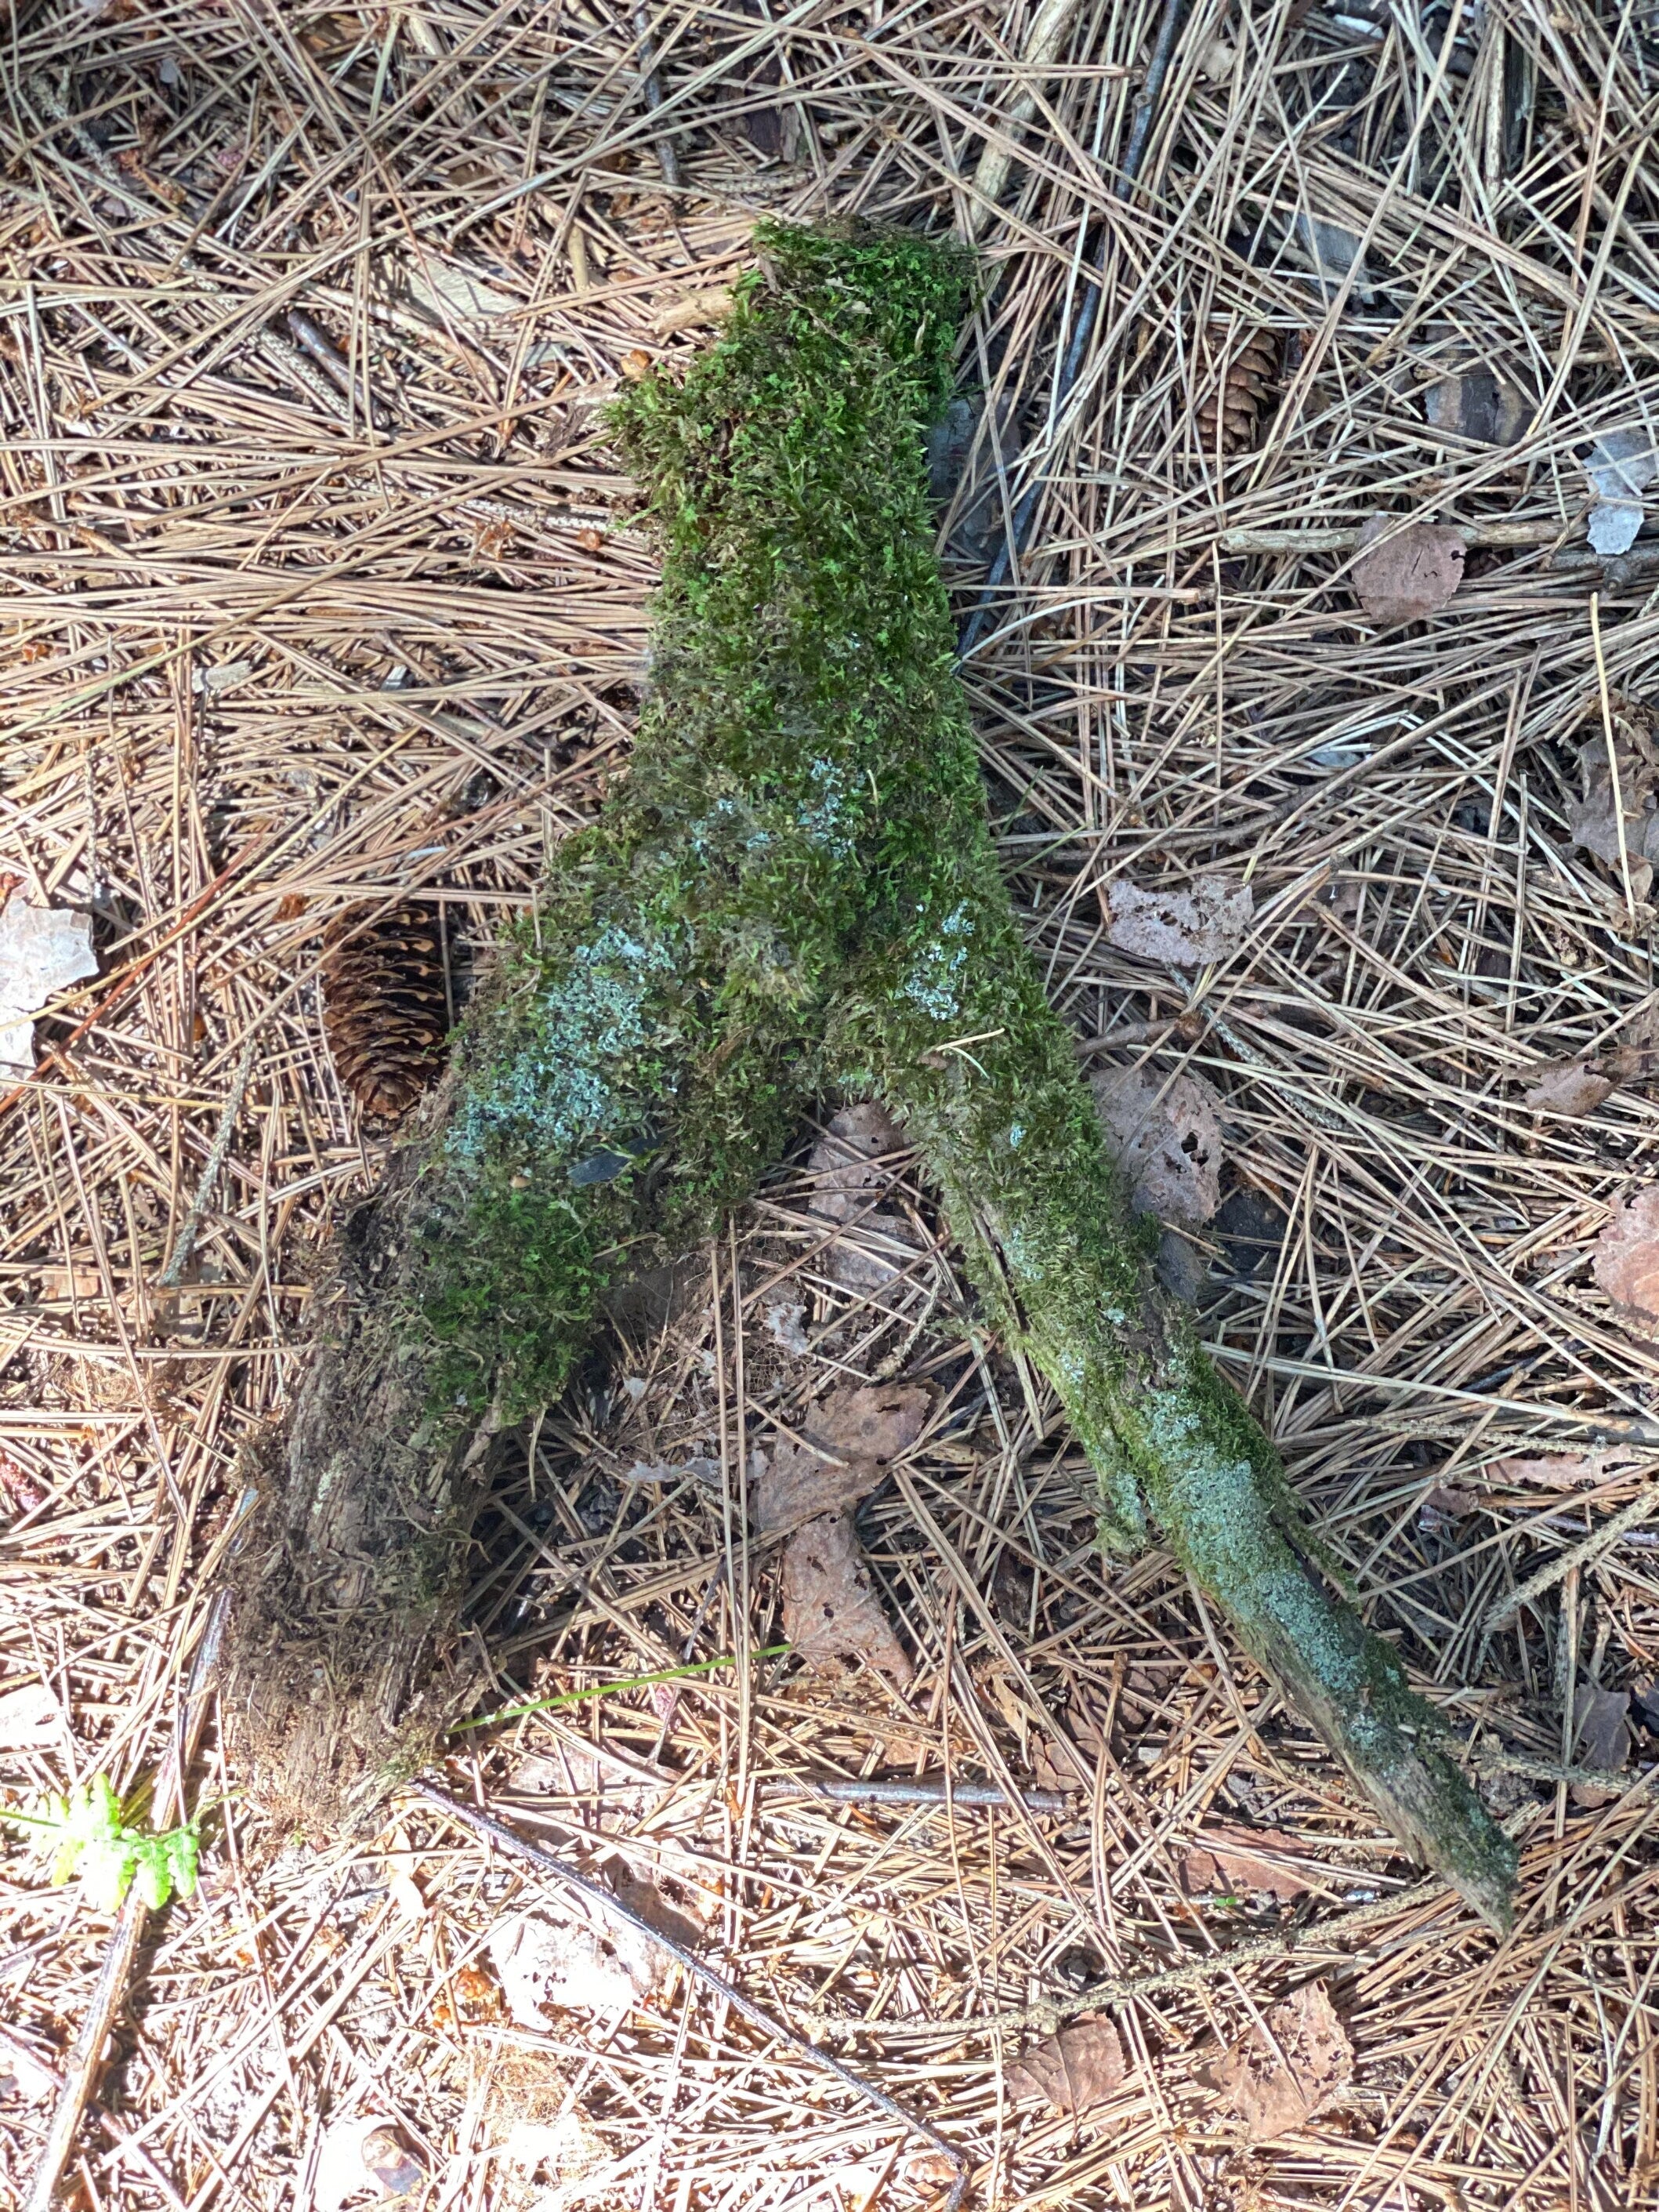 Moss Covered Log, Mossy Log, 13 Inches Long by 4 Inches Wide and 3 Inches High